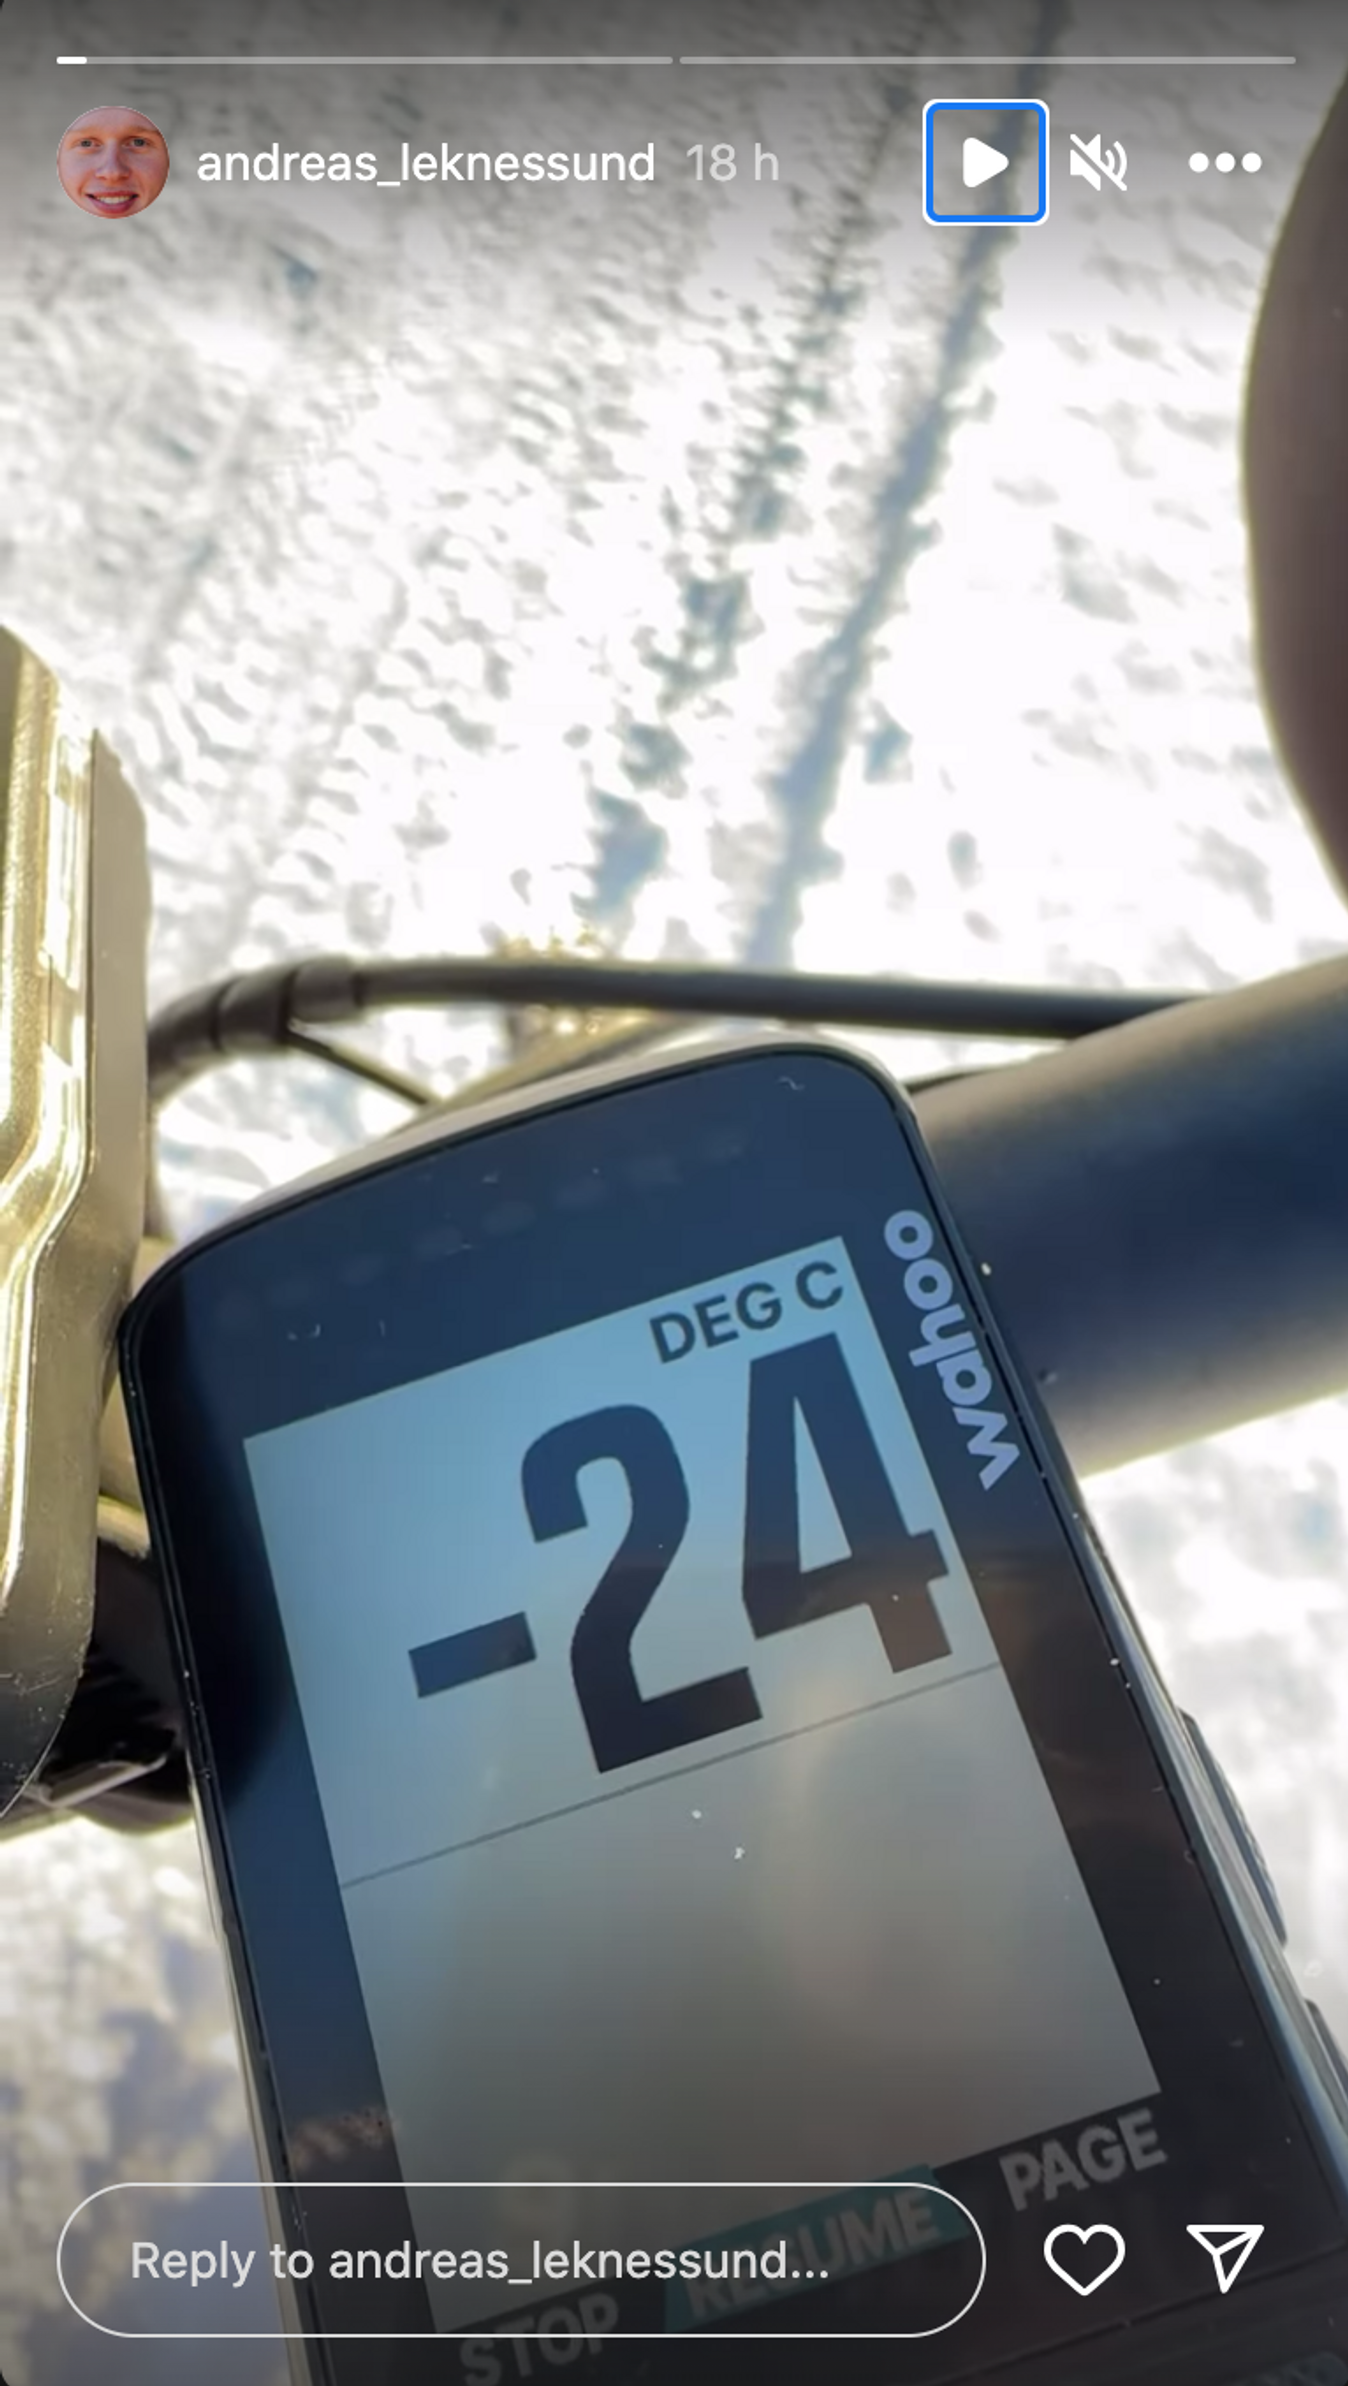 Andreas Leknessund braved extreme temperatures on a ride